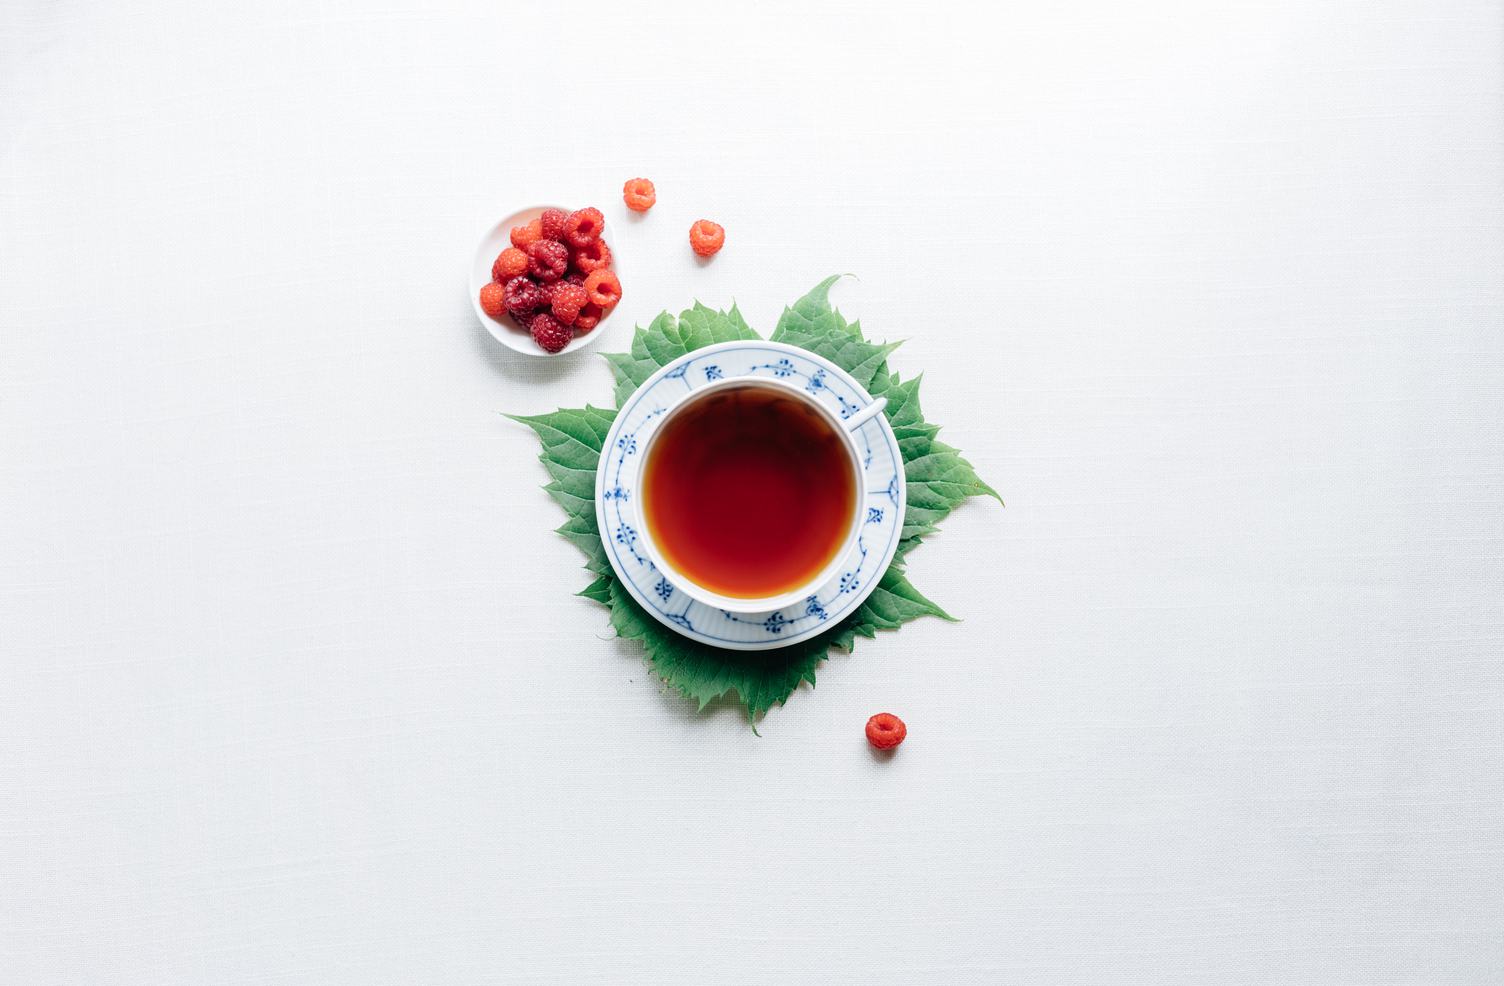 Tea in Porcelain Cup with Raspberries, Flair Lay